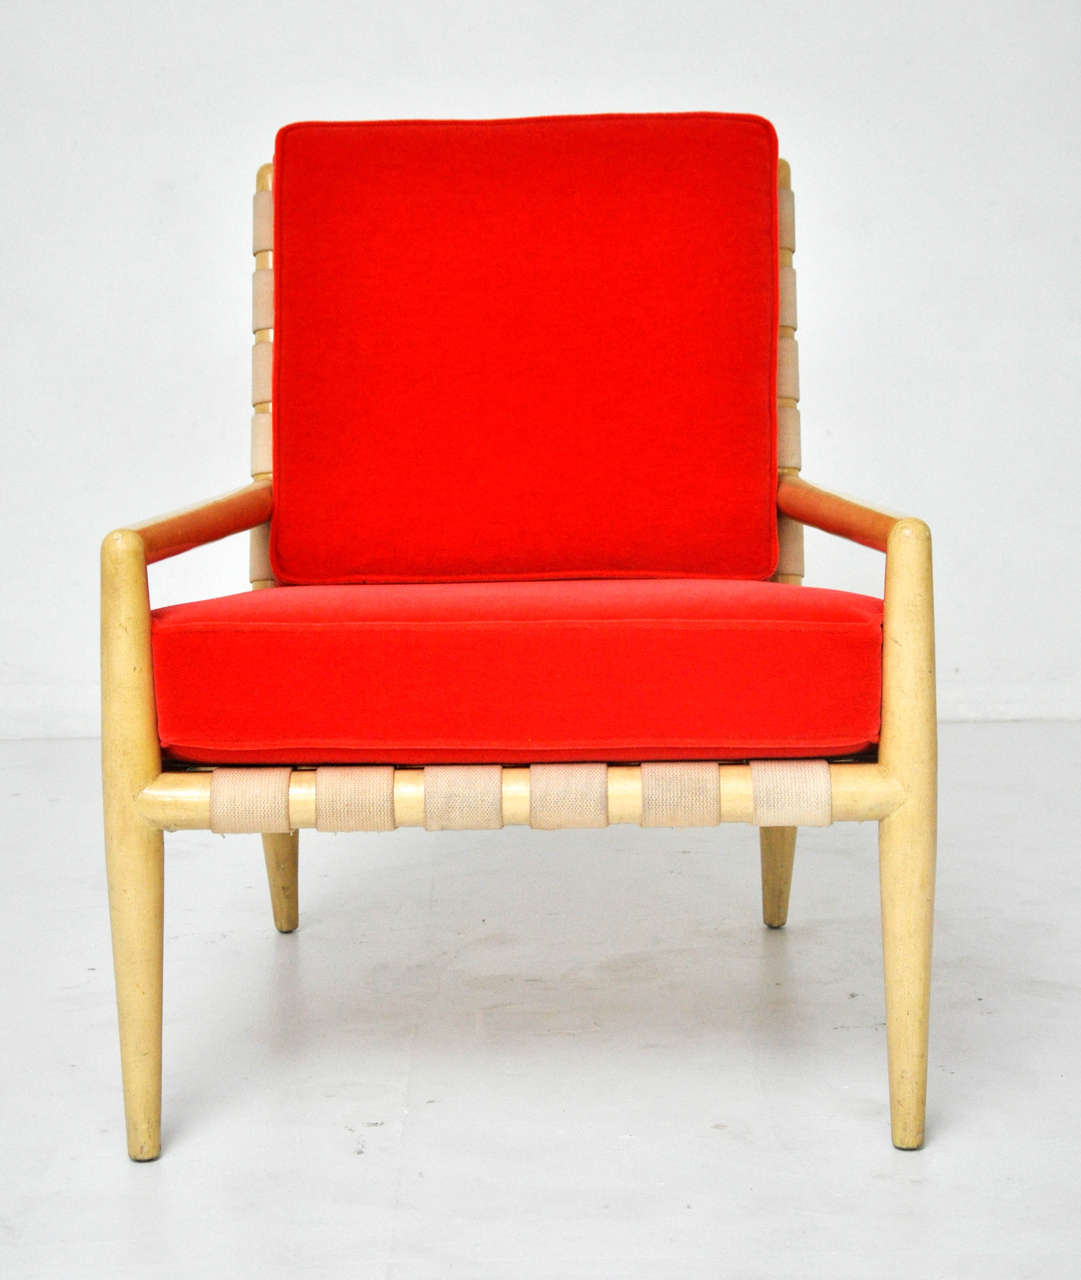 Lounge chair by T.H. Robsjohn-Gibbings. Original cream lacquer and webbing. New cushions upholstered in coral orange mohair.